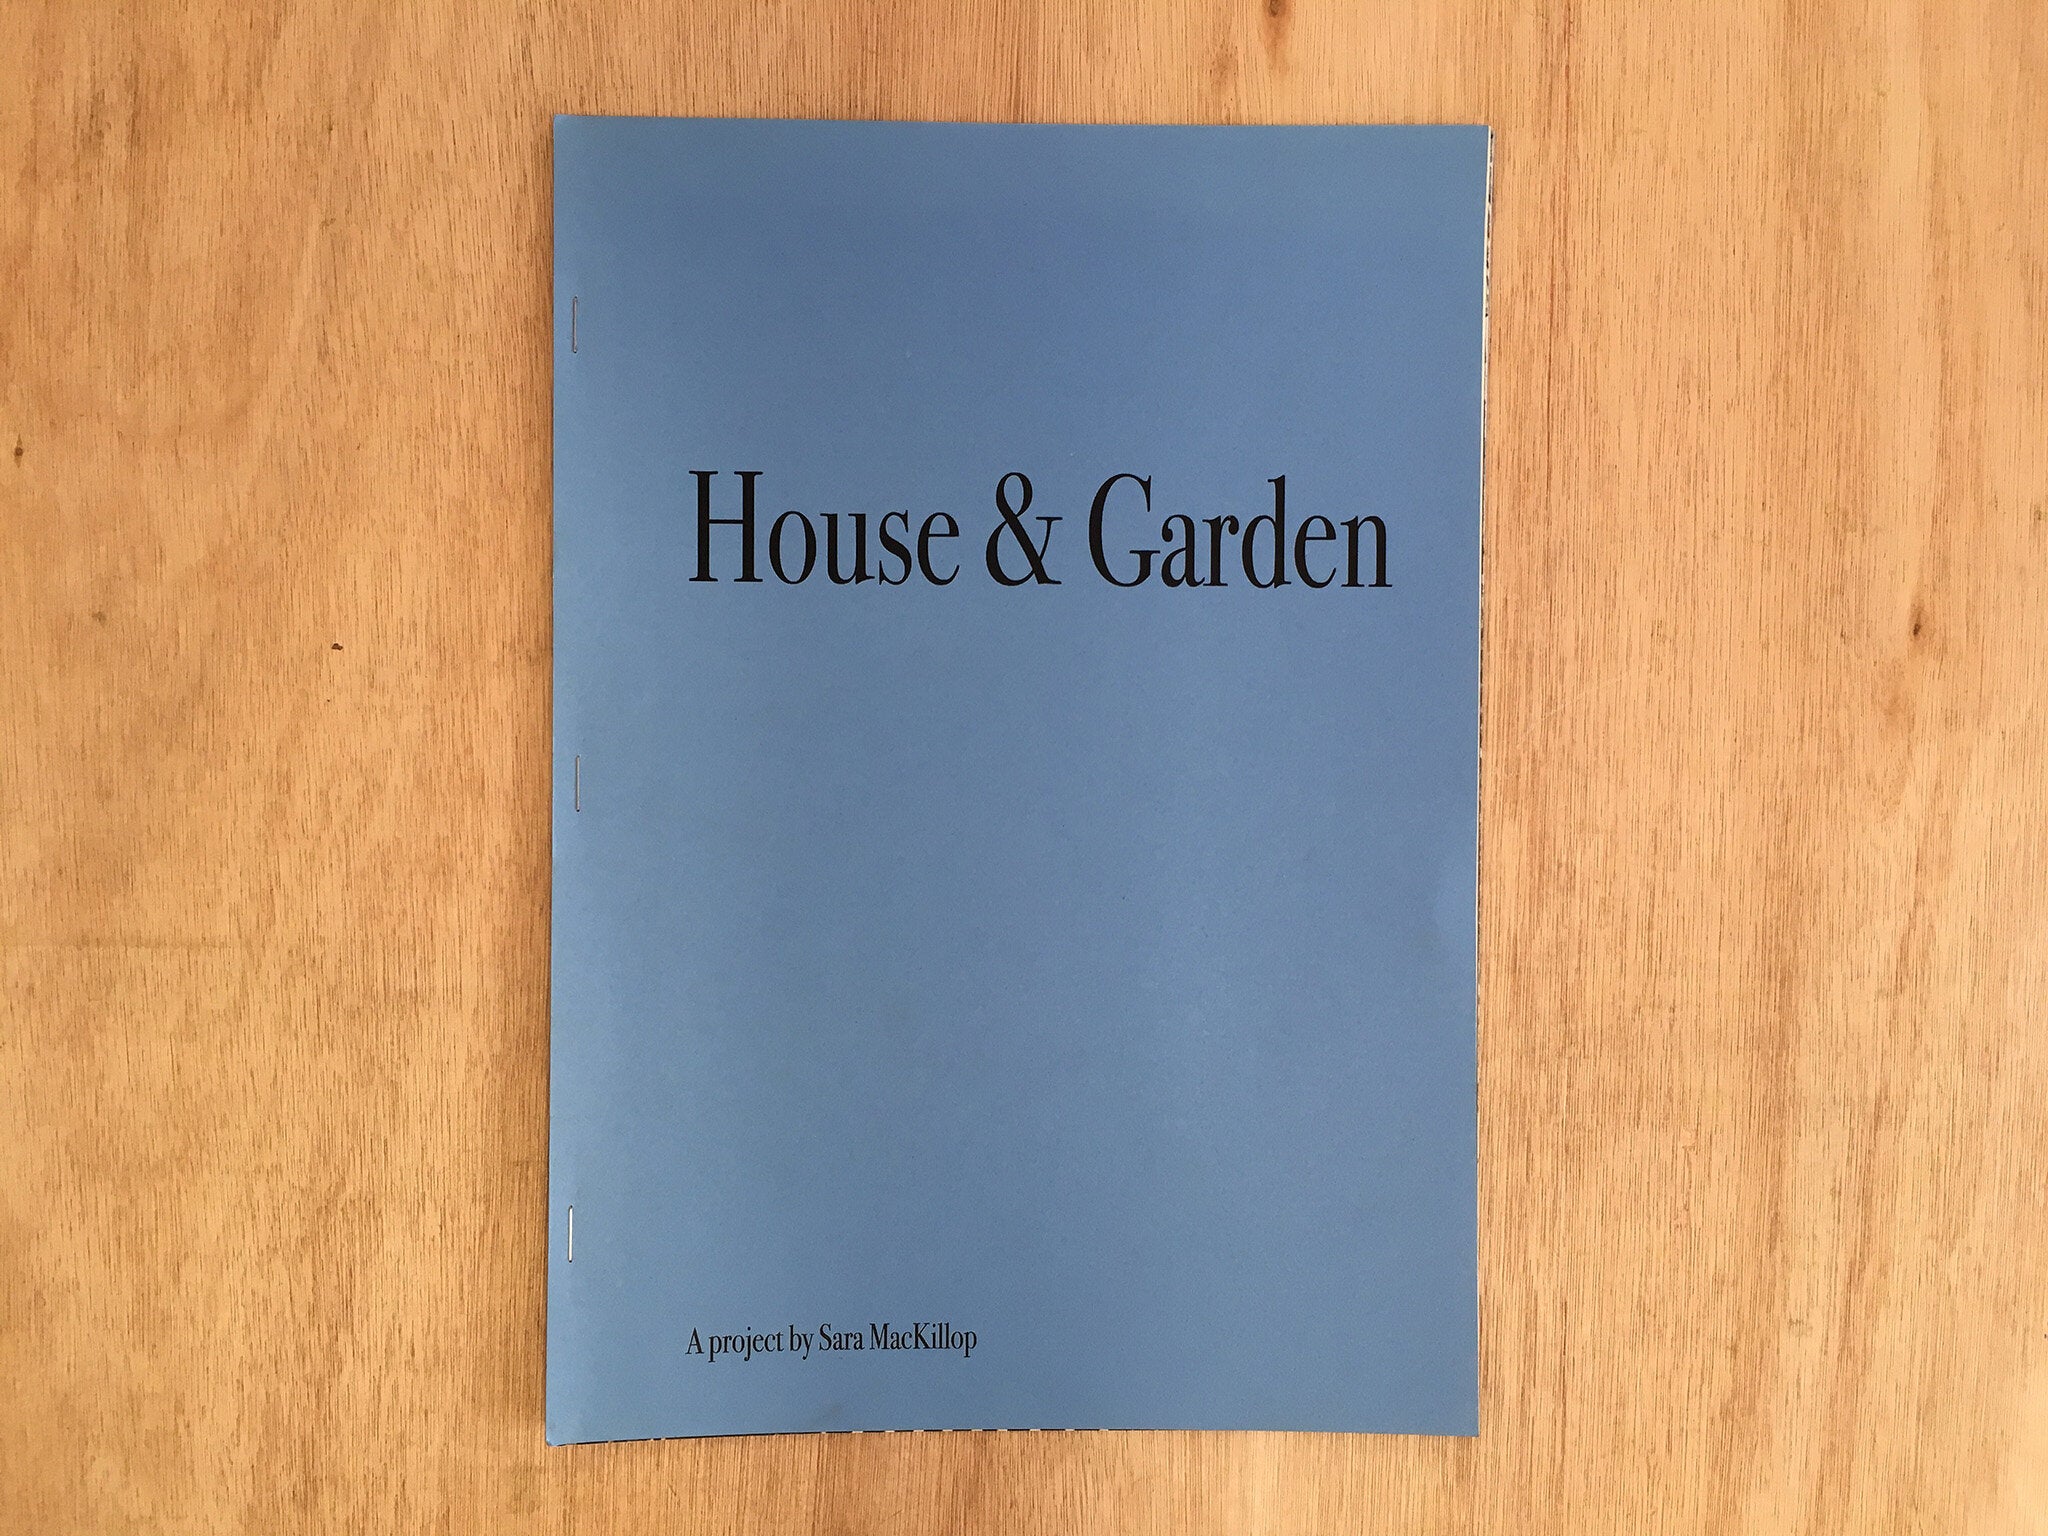 HOUSE and GARDEN by Sara MacKillop